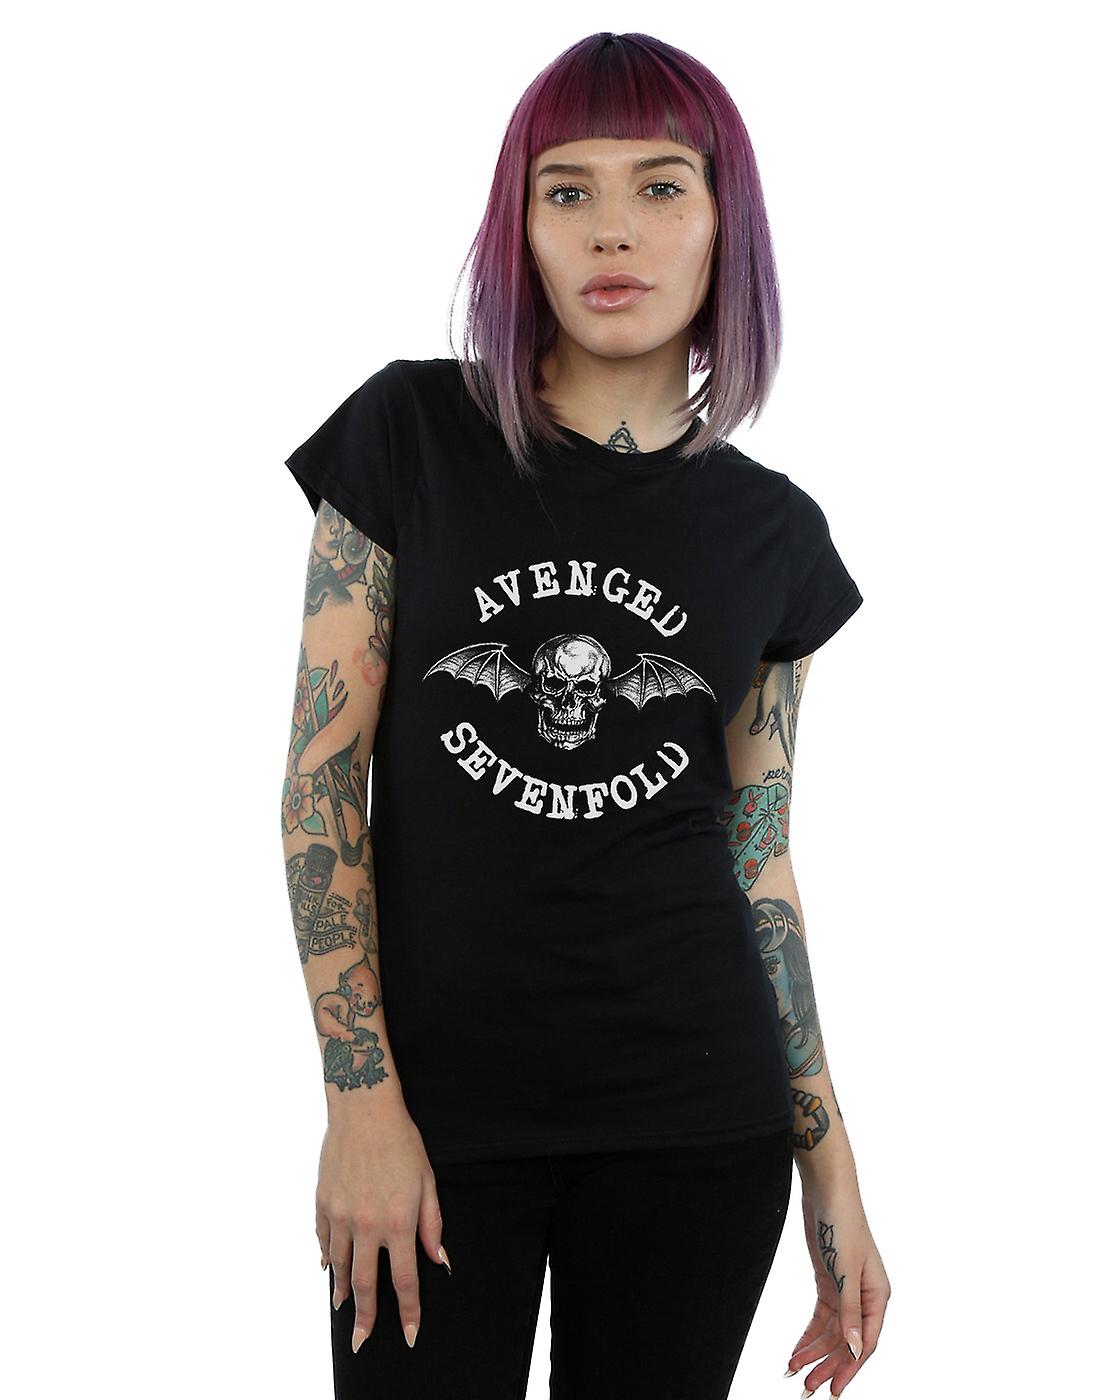 Avenged Sevenfold Official Merchandise: Wear Your Metal Pride